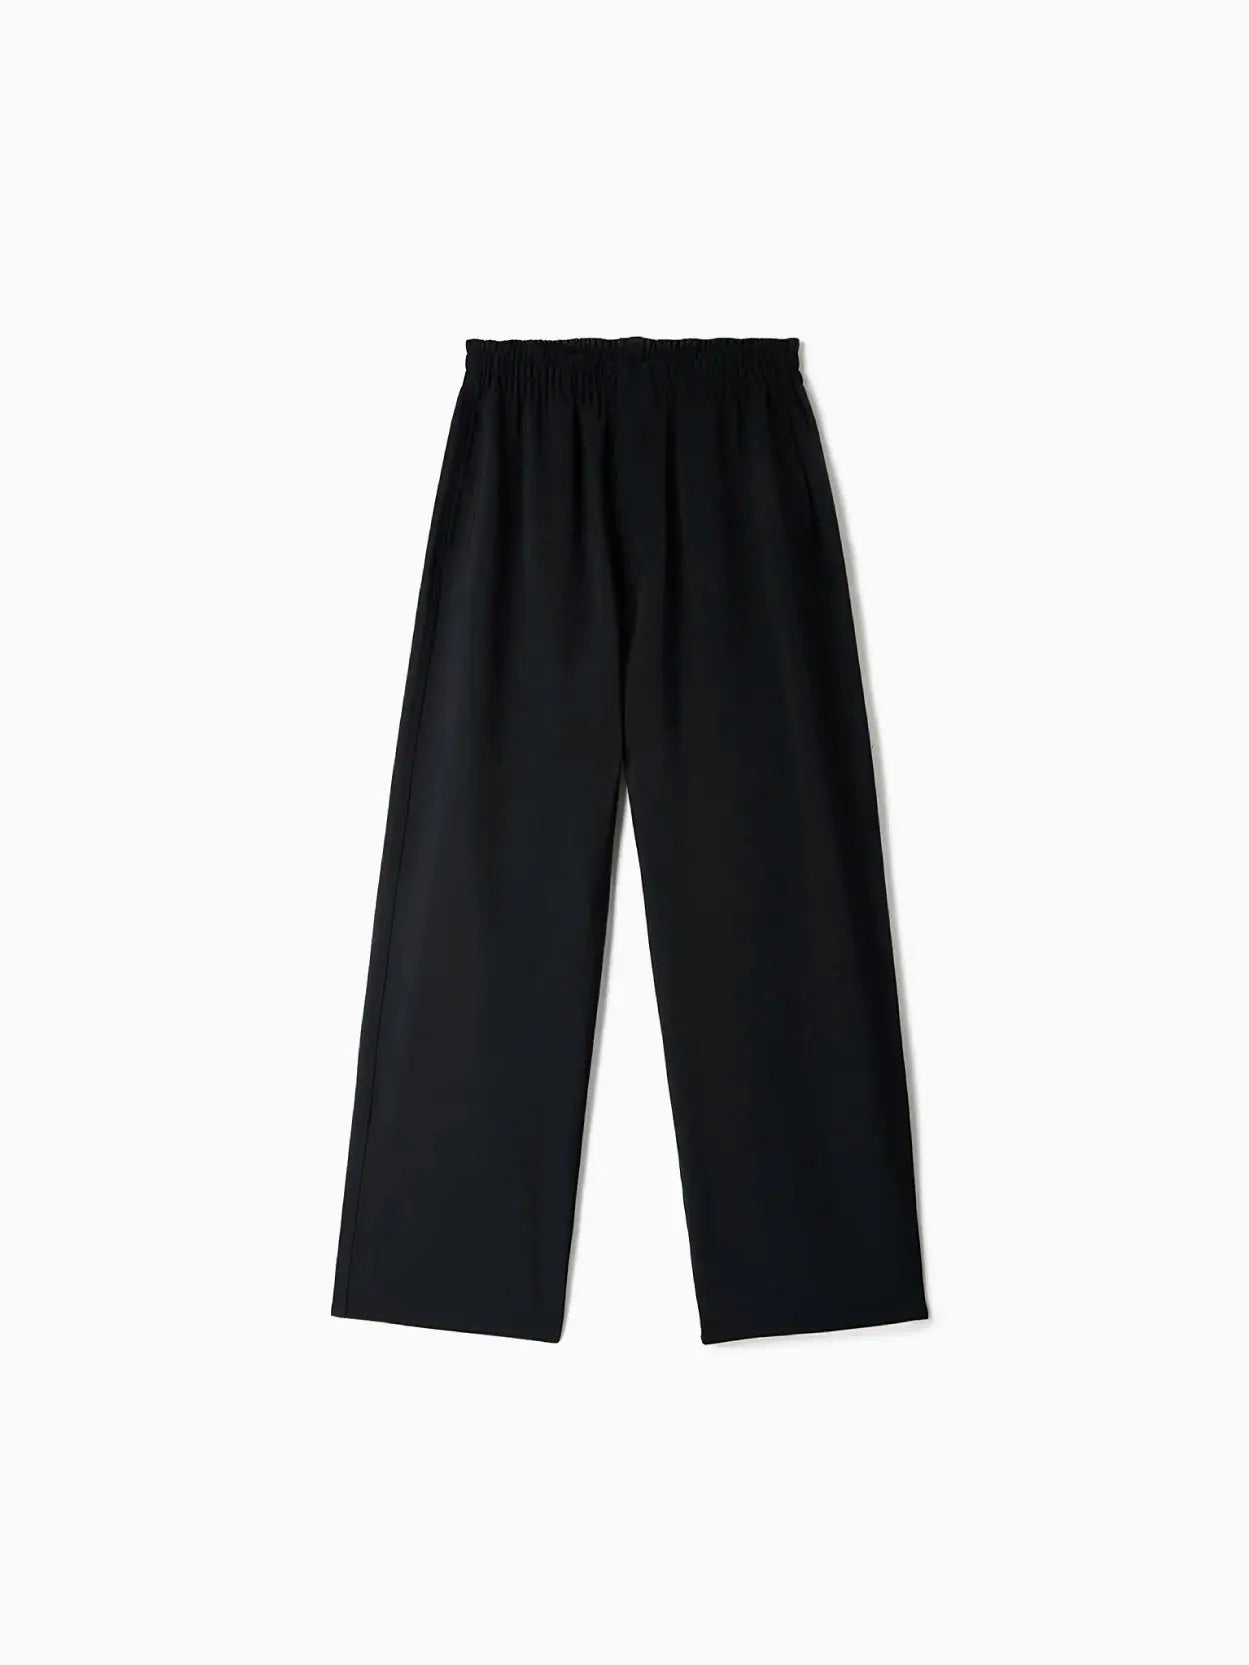 A pair of Sunnei Elastic Pants Black with an elastic waistband, displayed against a plain white background, perfect for your next casual day out. Available now at BassalStore in Barcelona.